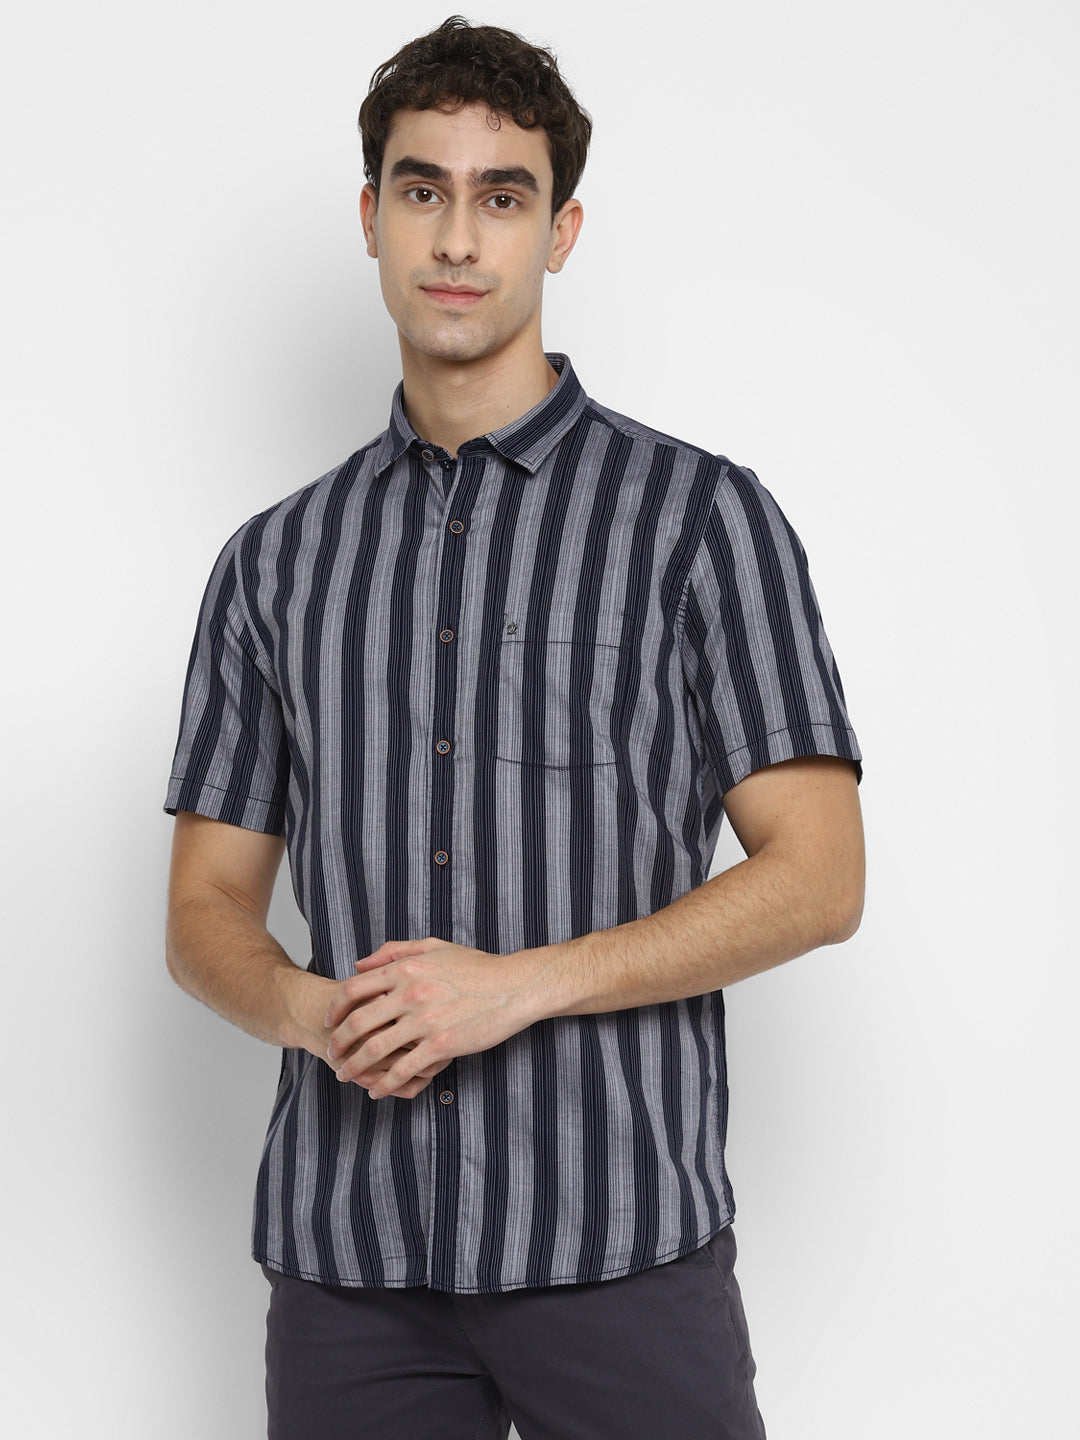 100% Cotton Navy Blue Striped Slim Fit Half Sleeve Casual Shirt